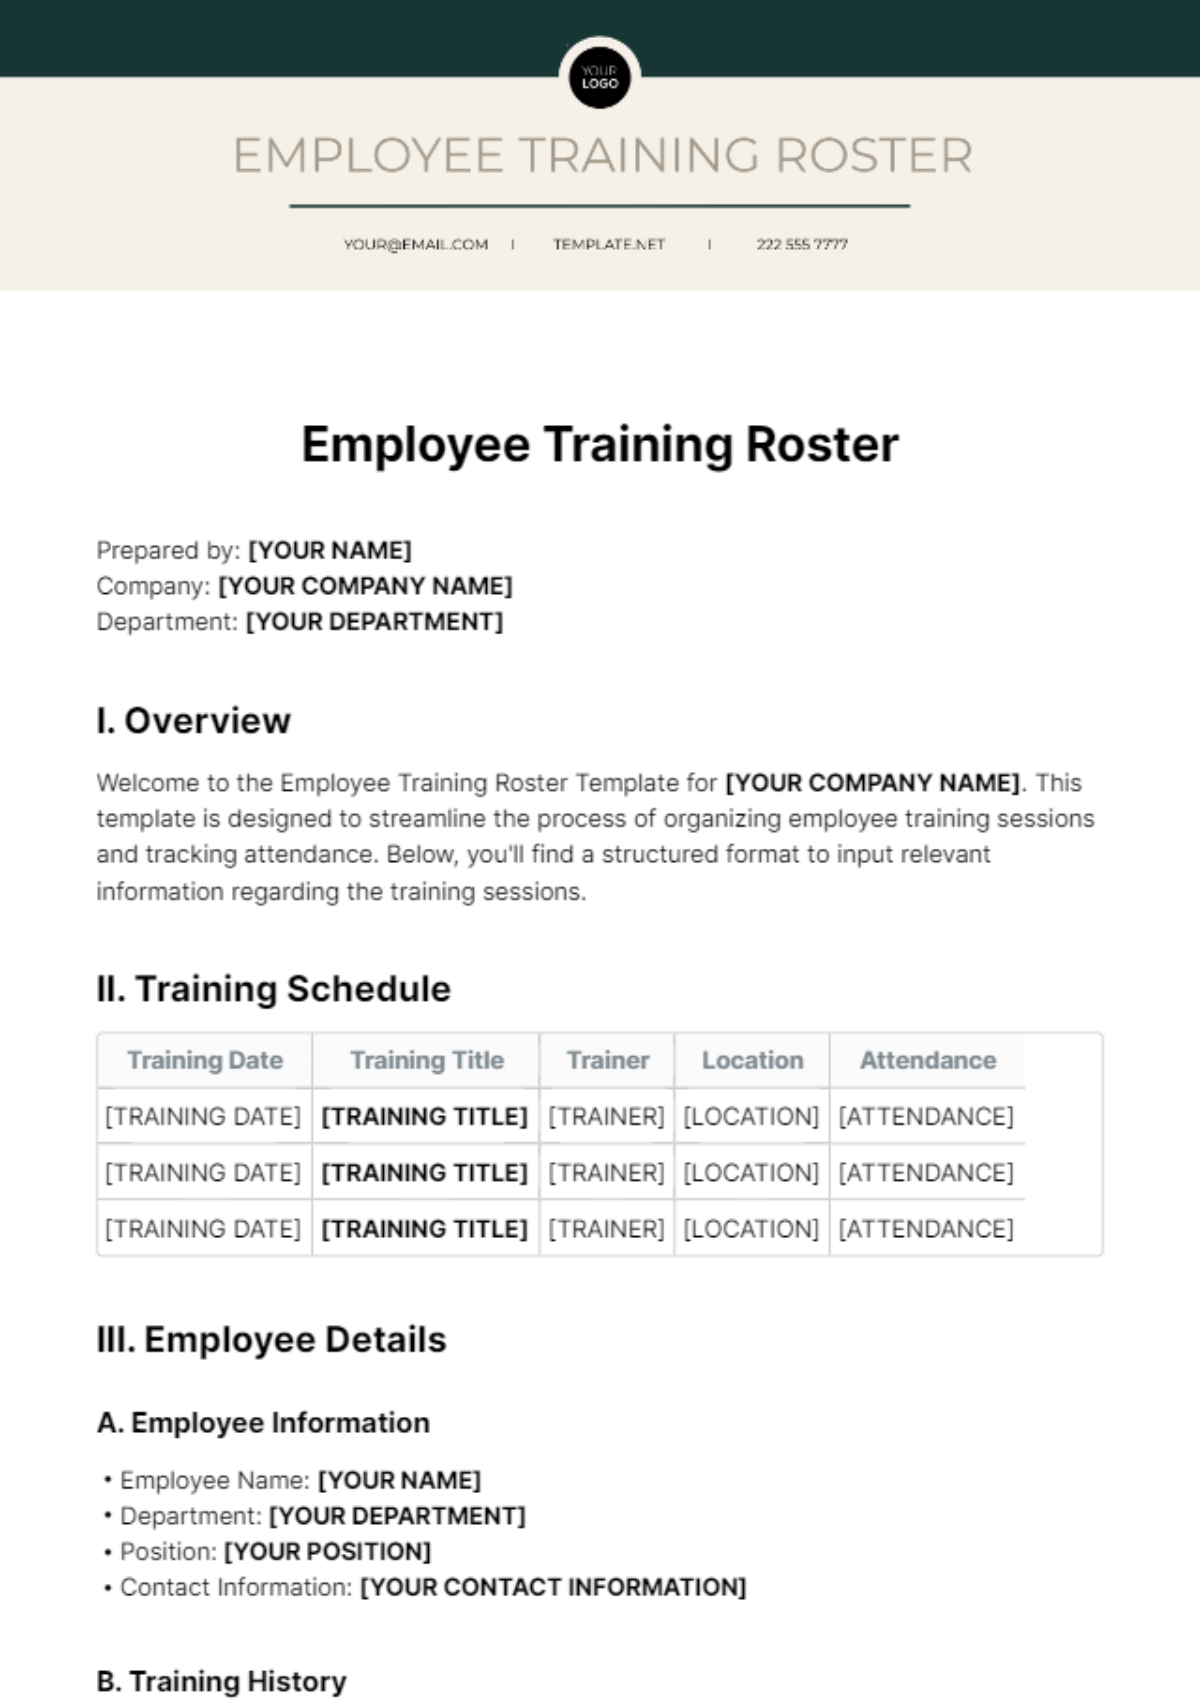 Employee Training Roster Template